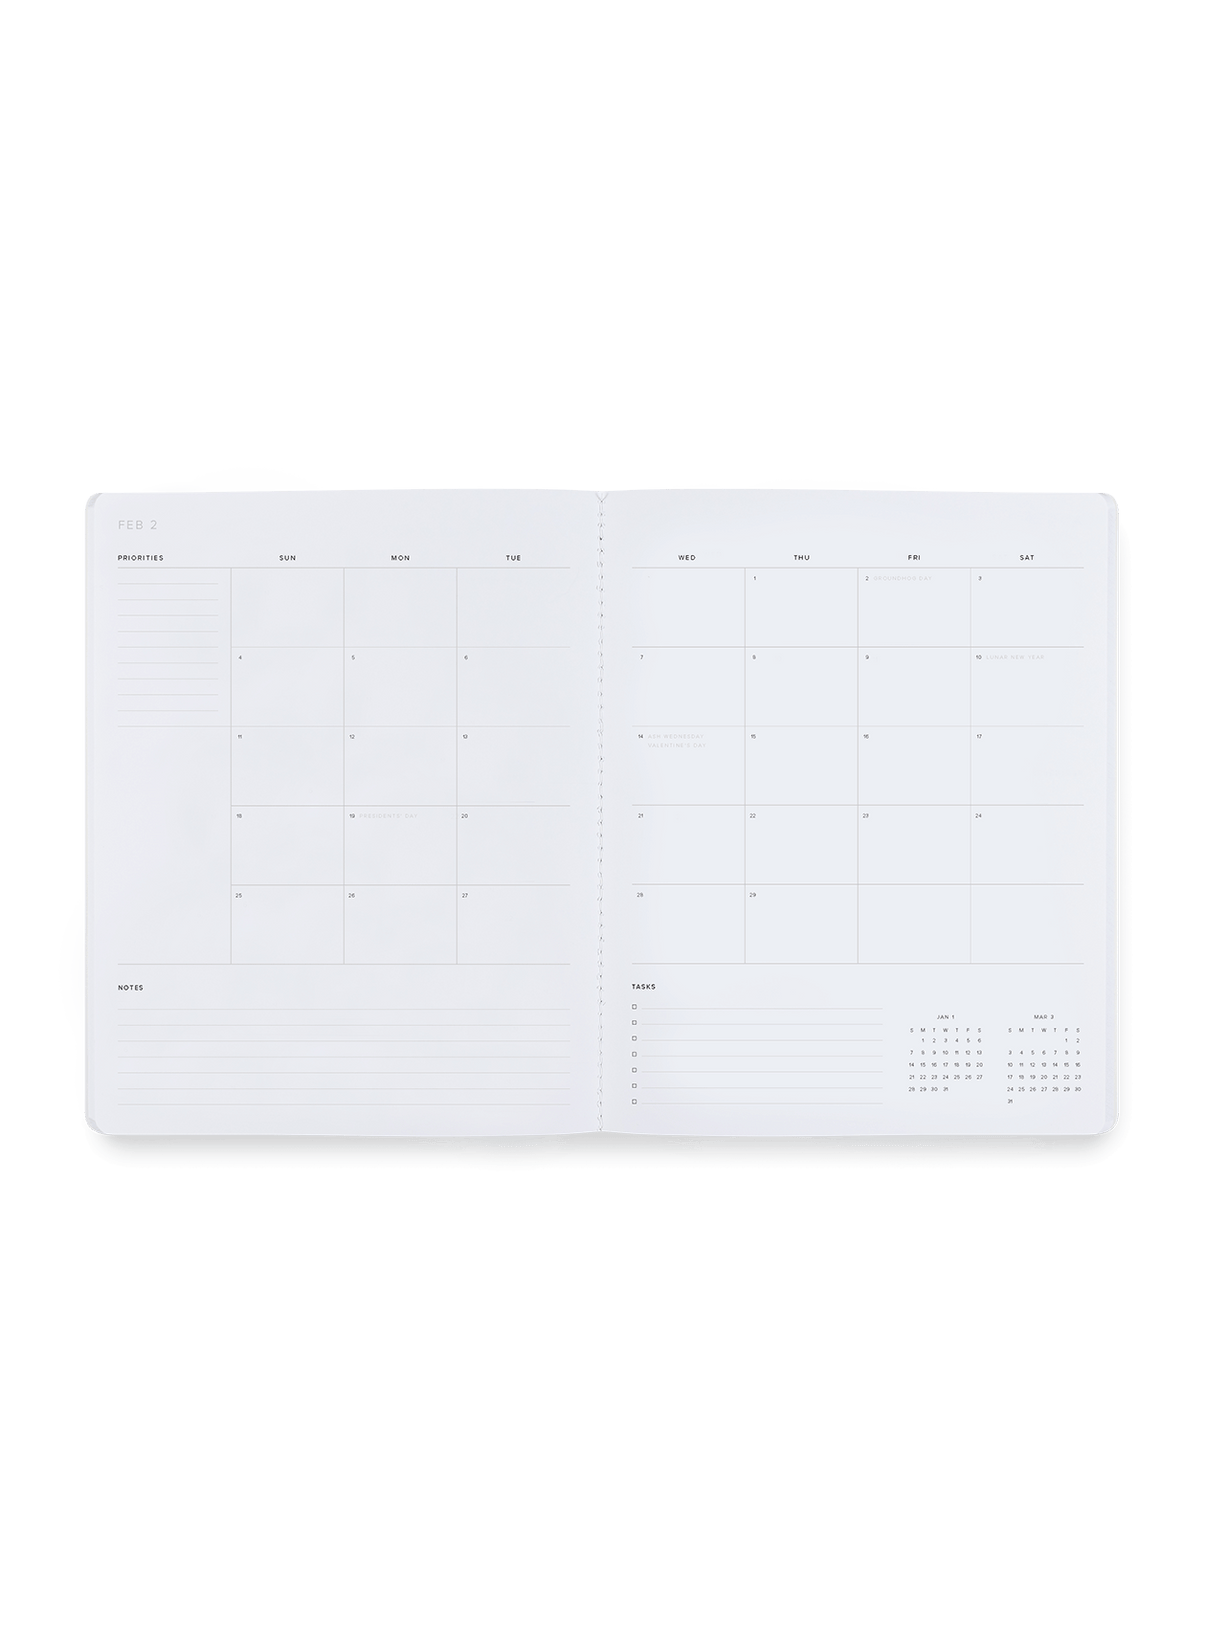 2024 Appointed Monthly Planner - Hunter Green